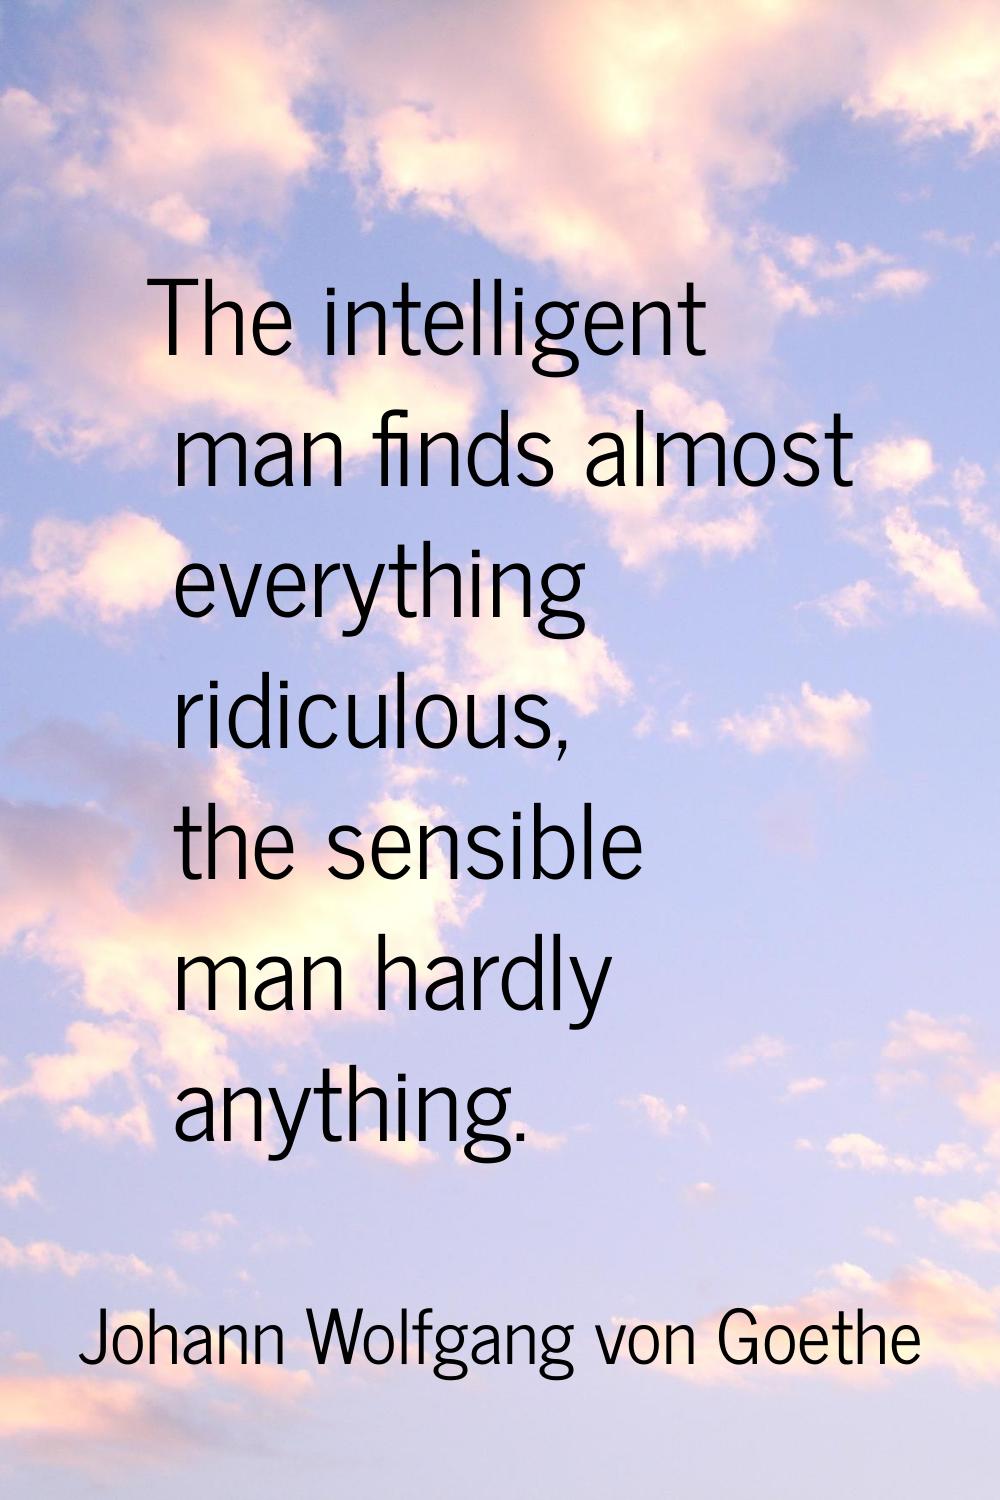 The intelligent man finds almost everything ridiculous, the sensible man hardly anything.